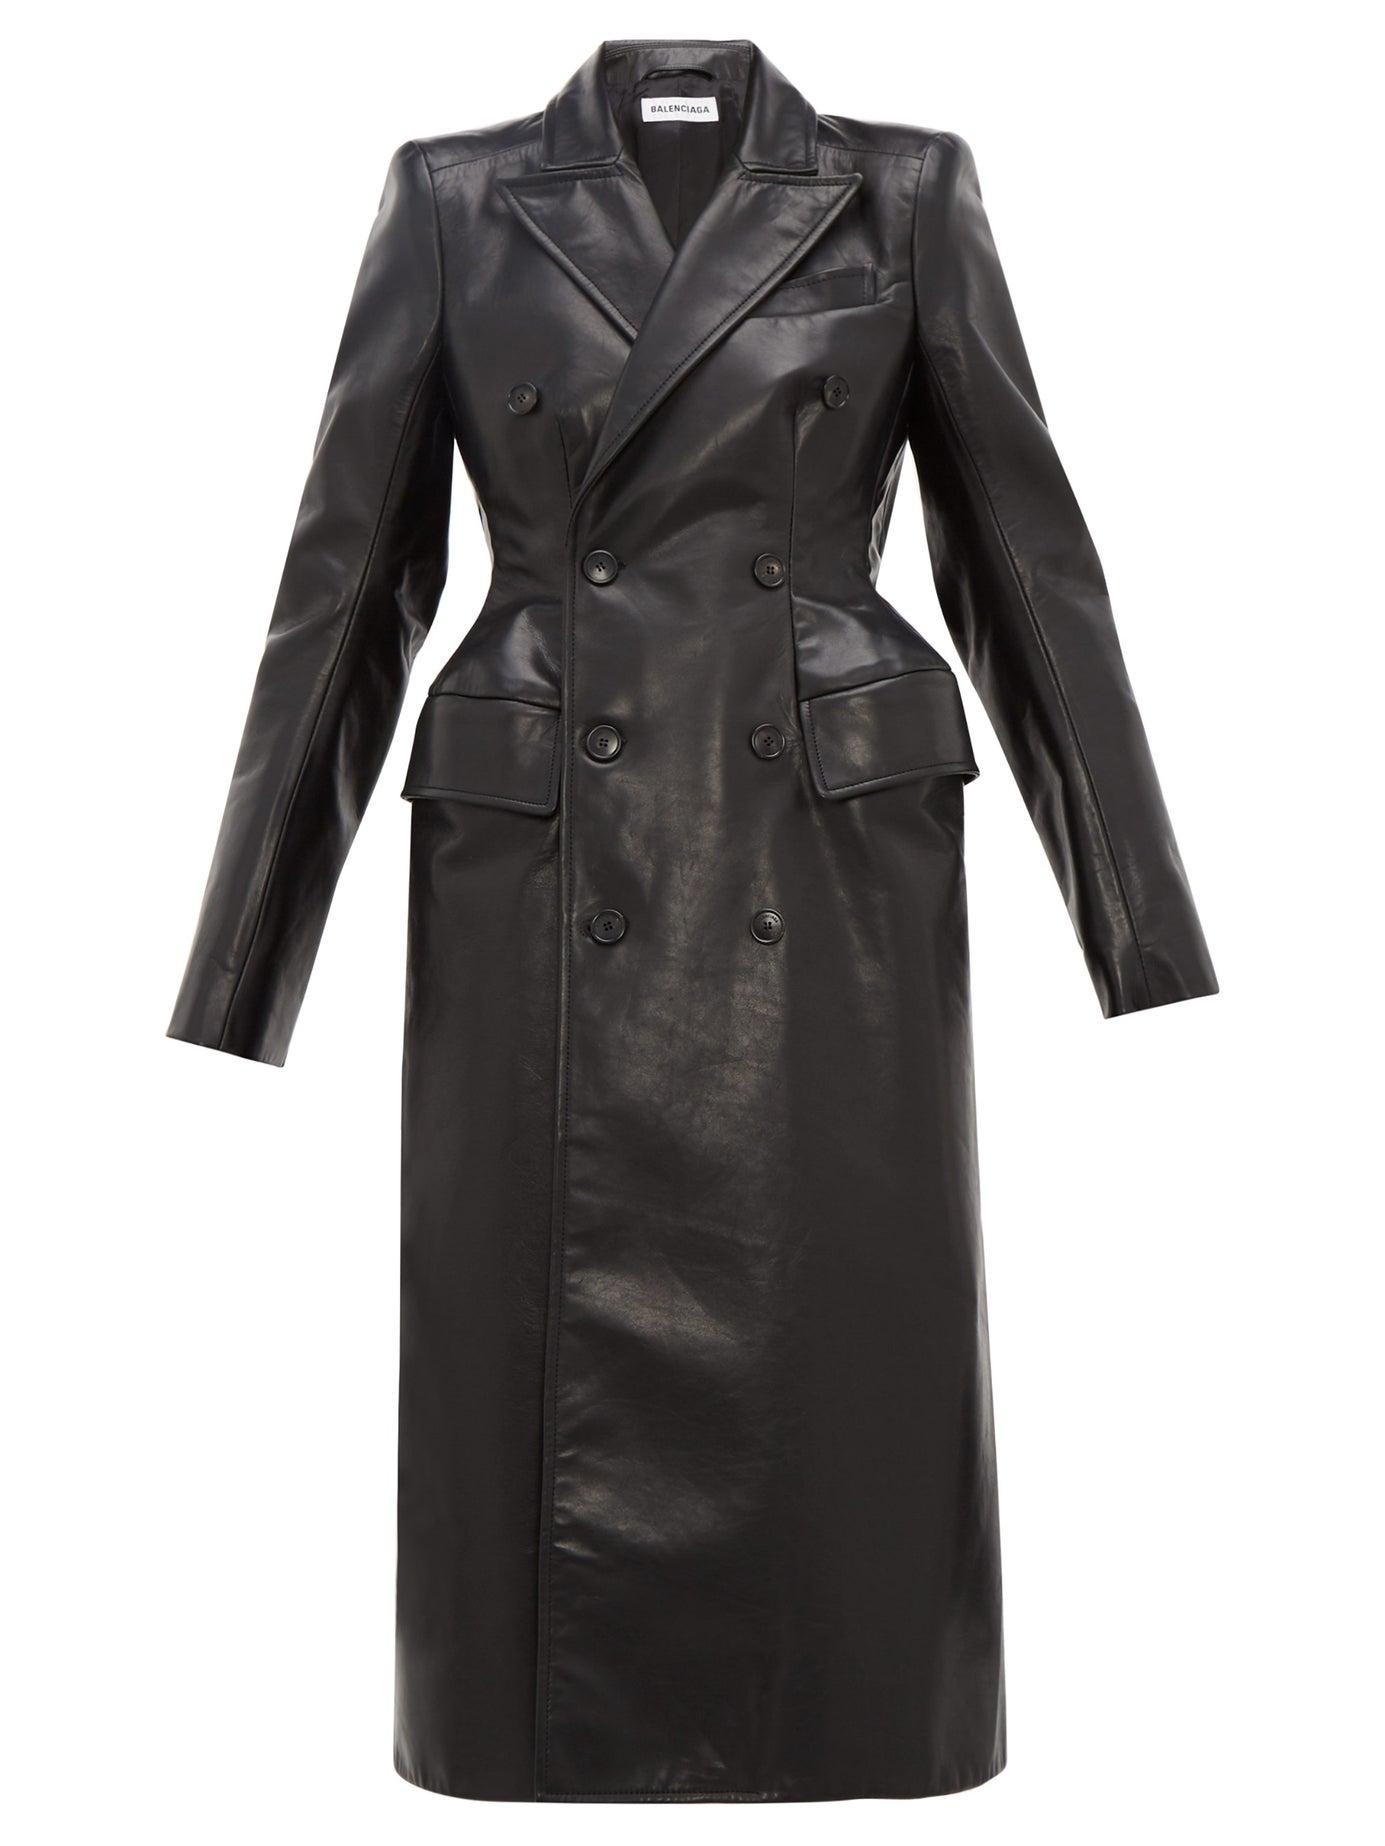 Balenciaga Double-breasted Hourglass Leather Coat in Black | Lyst